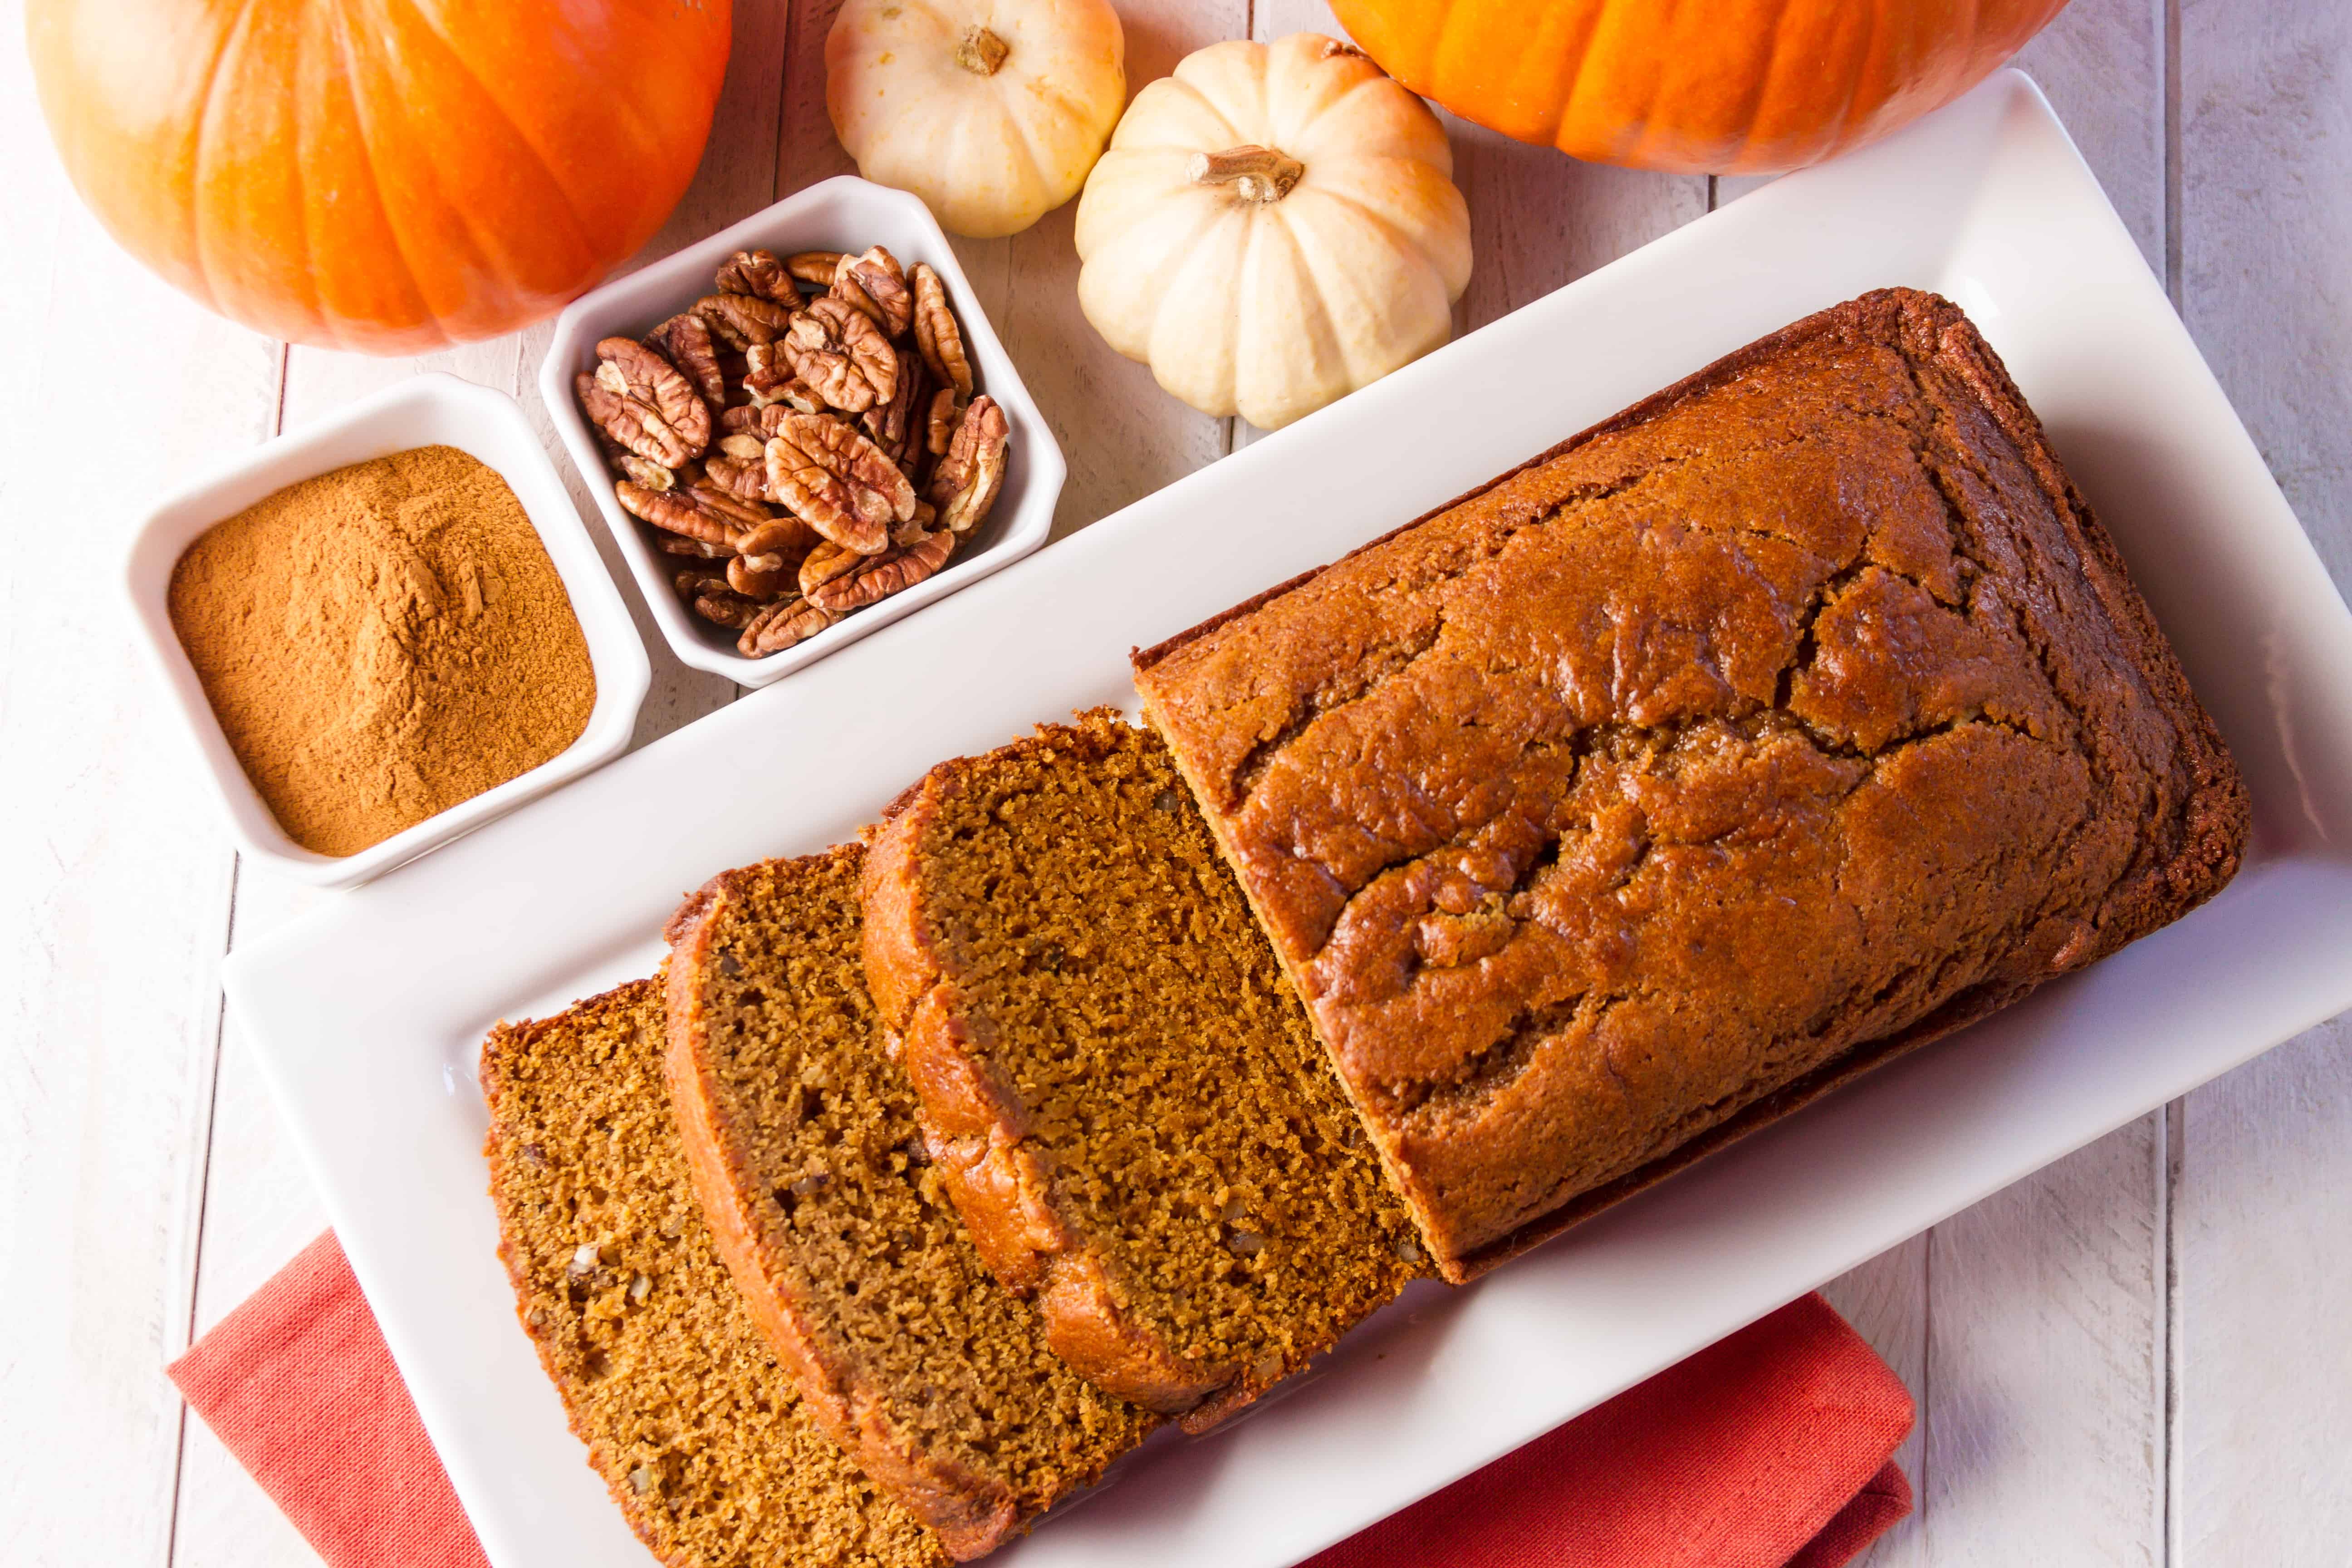 Pumpkin-bread-is-so-flavorful-and-easy-to-make-a-true-winner-for-most-families-Get-our-simple-and-incredible-recipe-at-Made-in-a-Pinch.-For-more-great-recipes-and-helpful-tips-follow-us-on-Pinterest1